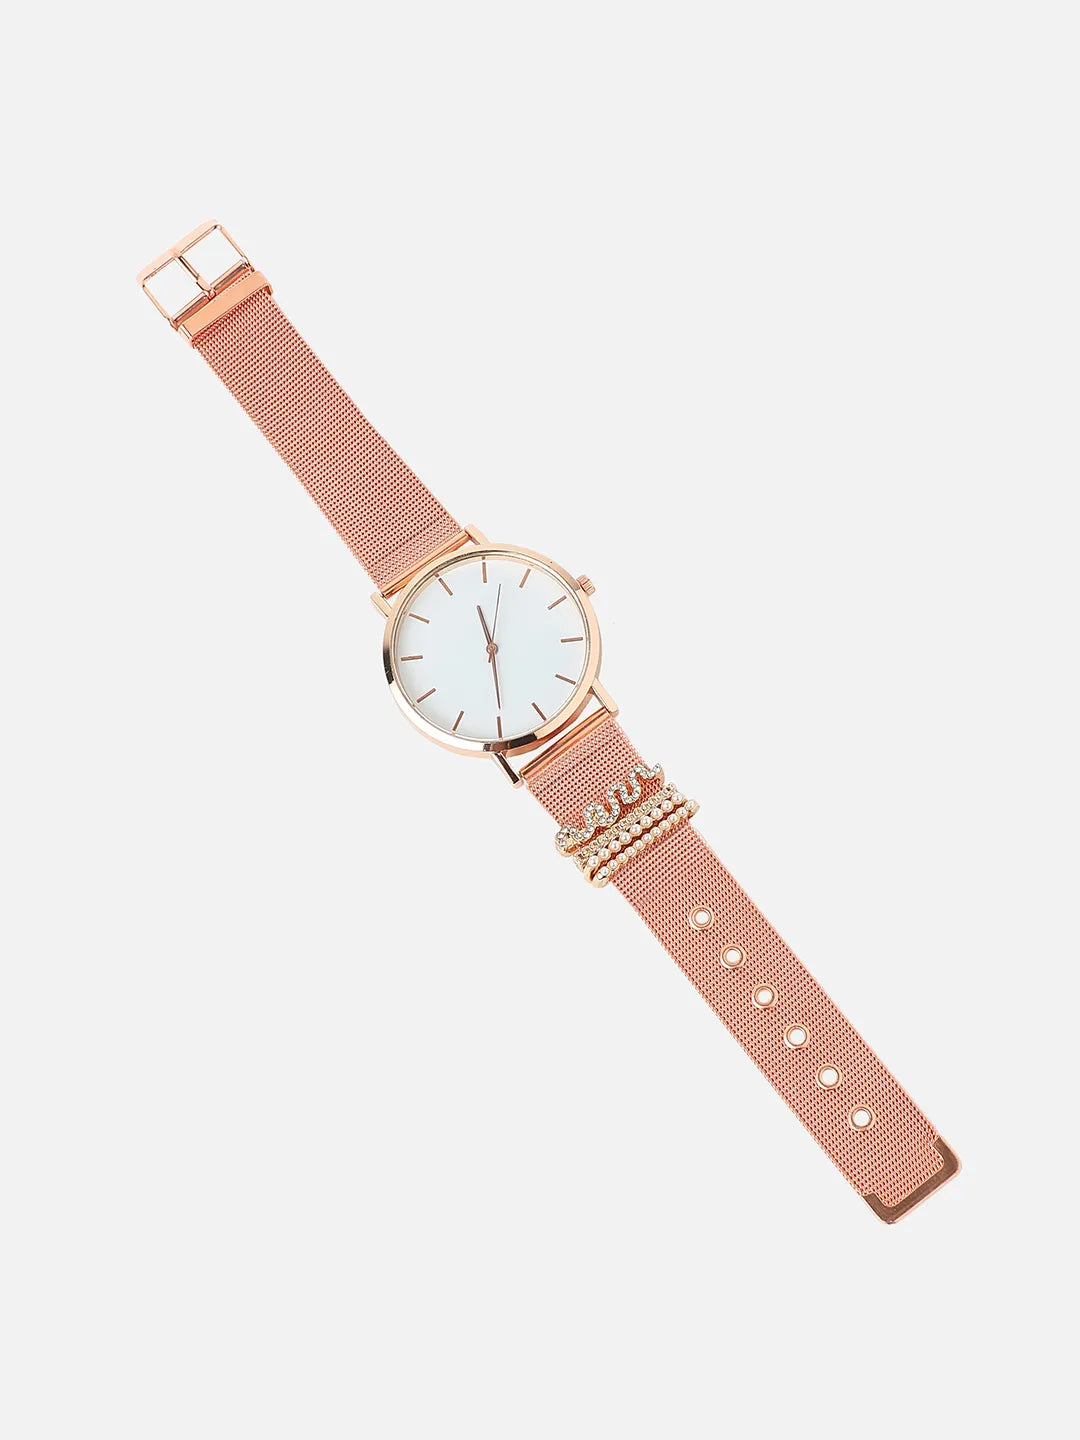 Round Analog Watch With Pearl Wave Watch Charm - Rose Gold